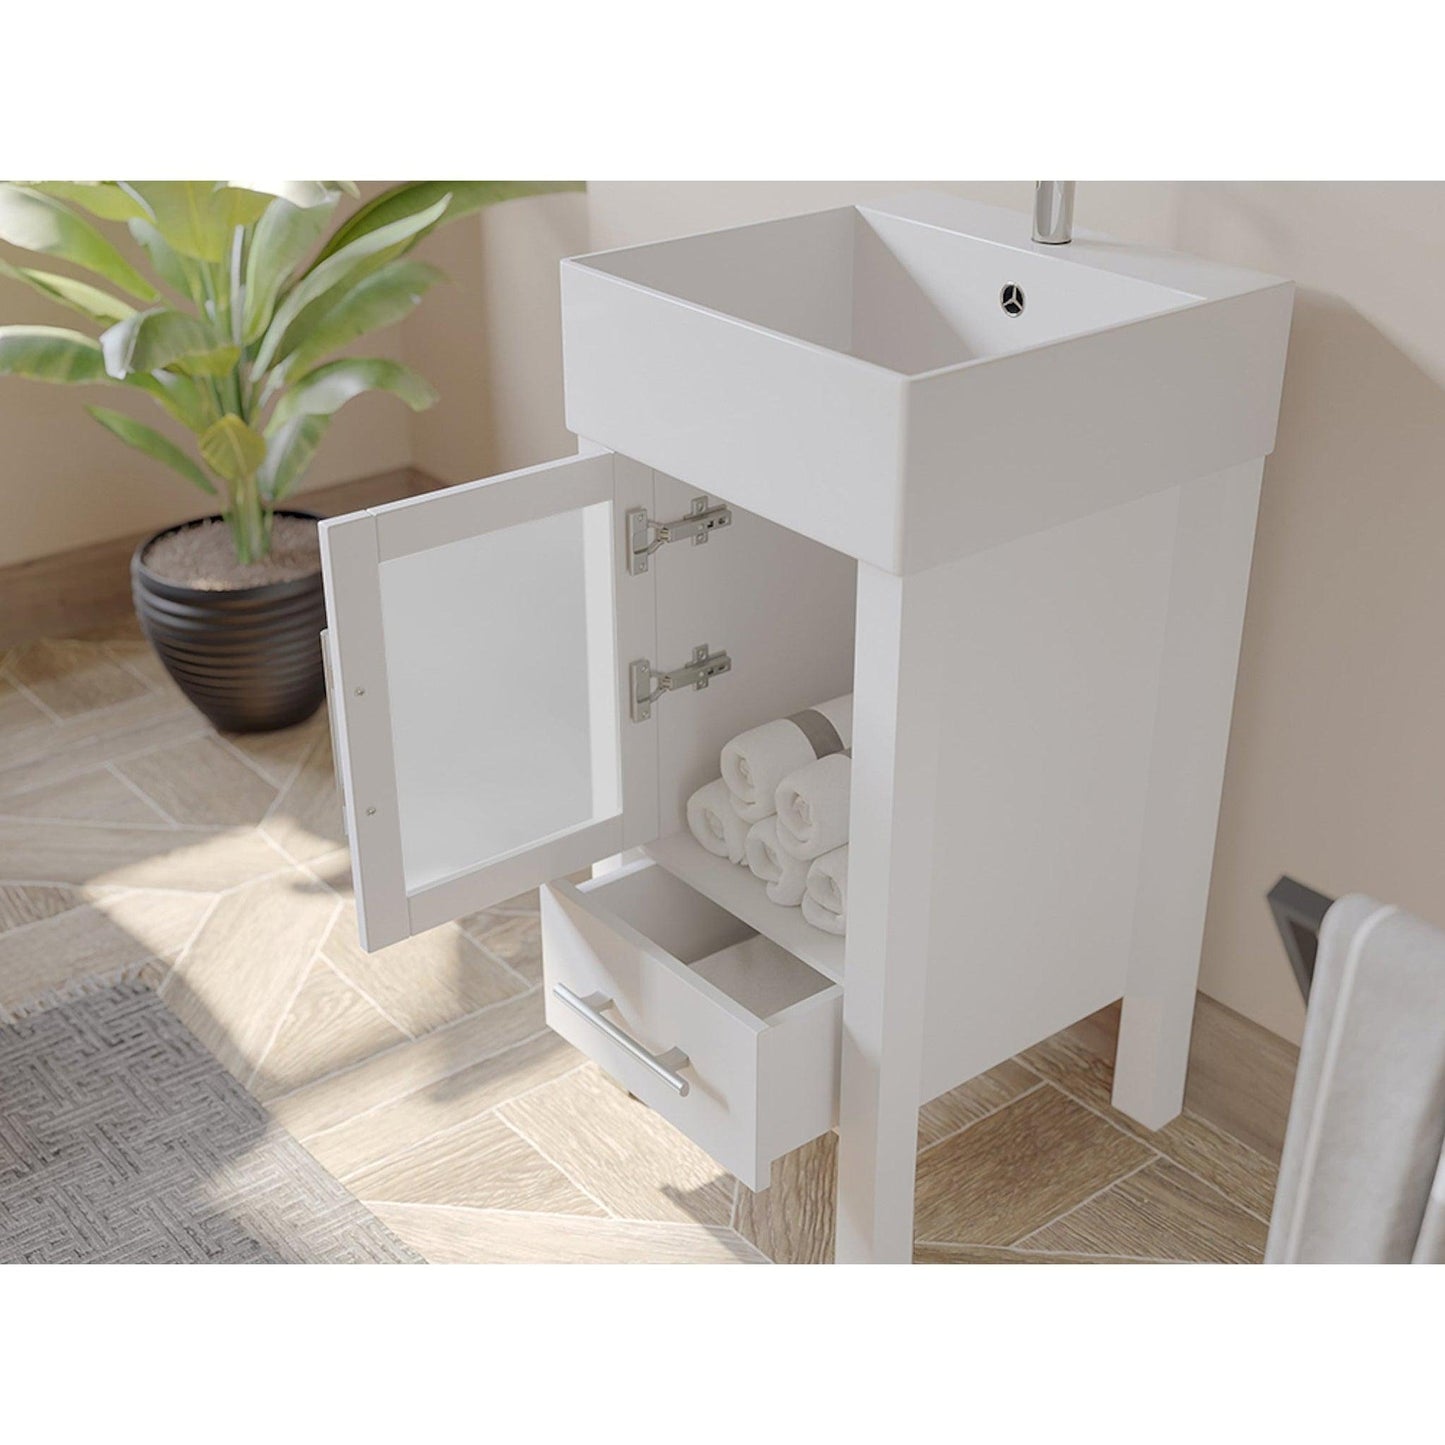 Cambridge Plumbing 18" White Single Wood Vanity Set With Porcelain Countertop And Square Vessel Sink With Faucet Hole And Brushed Nickel Plumbing Finish